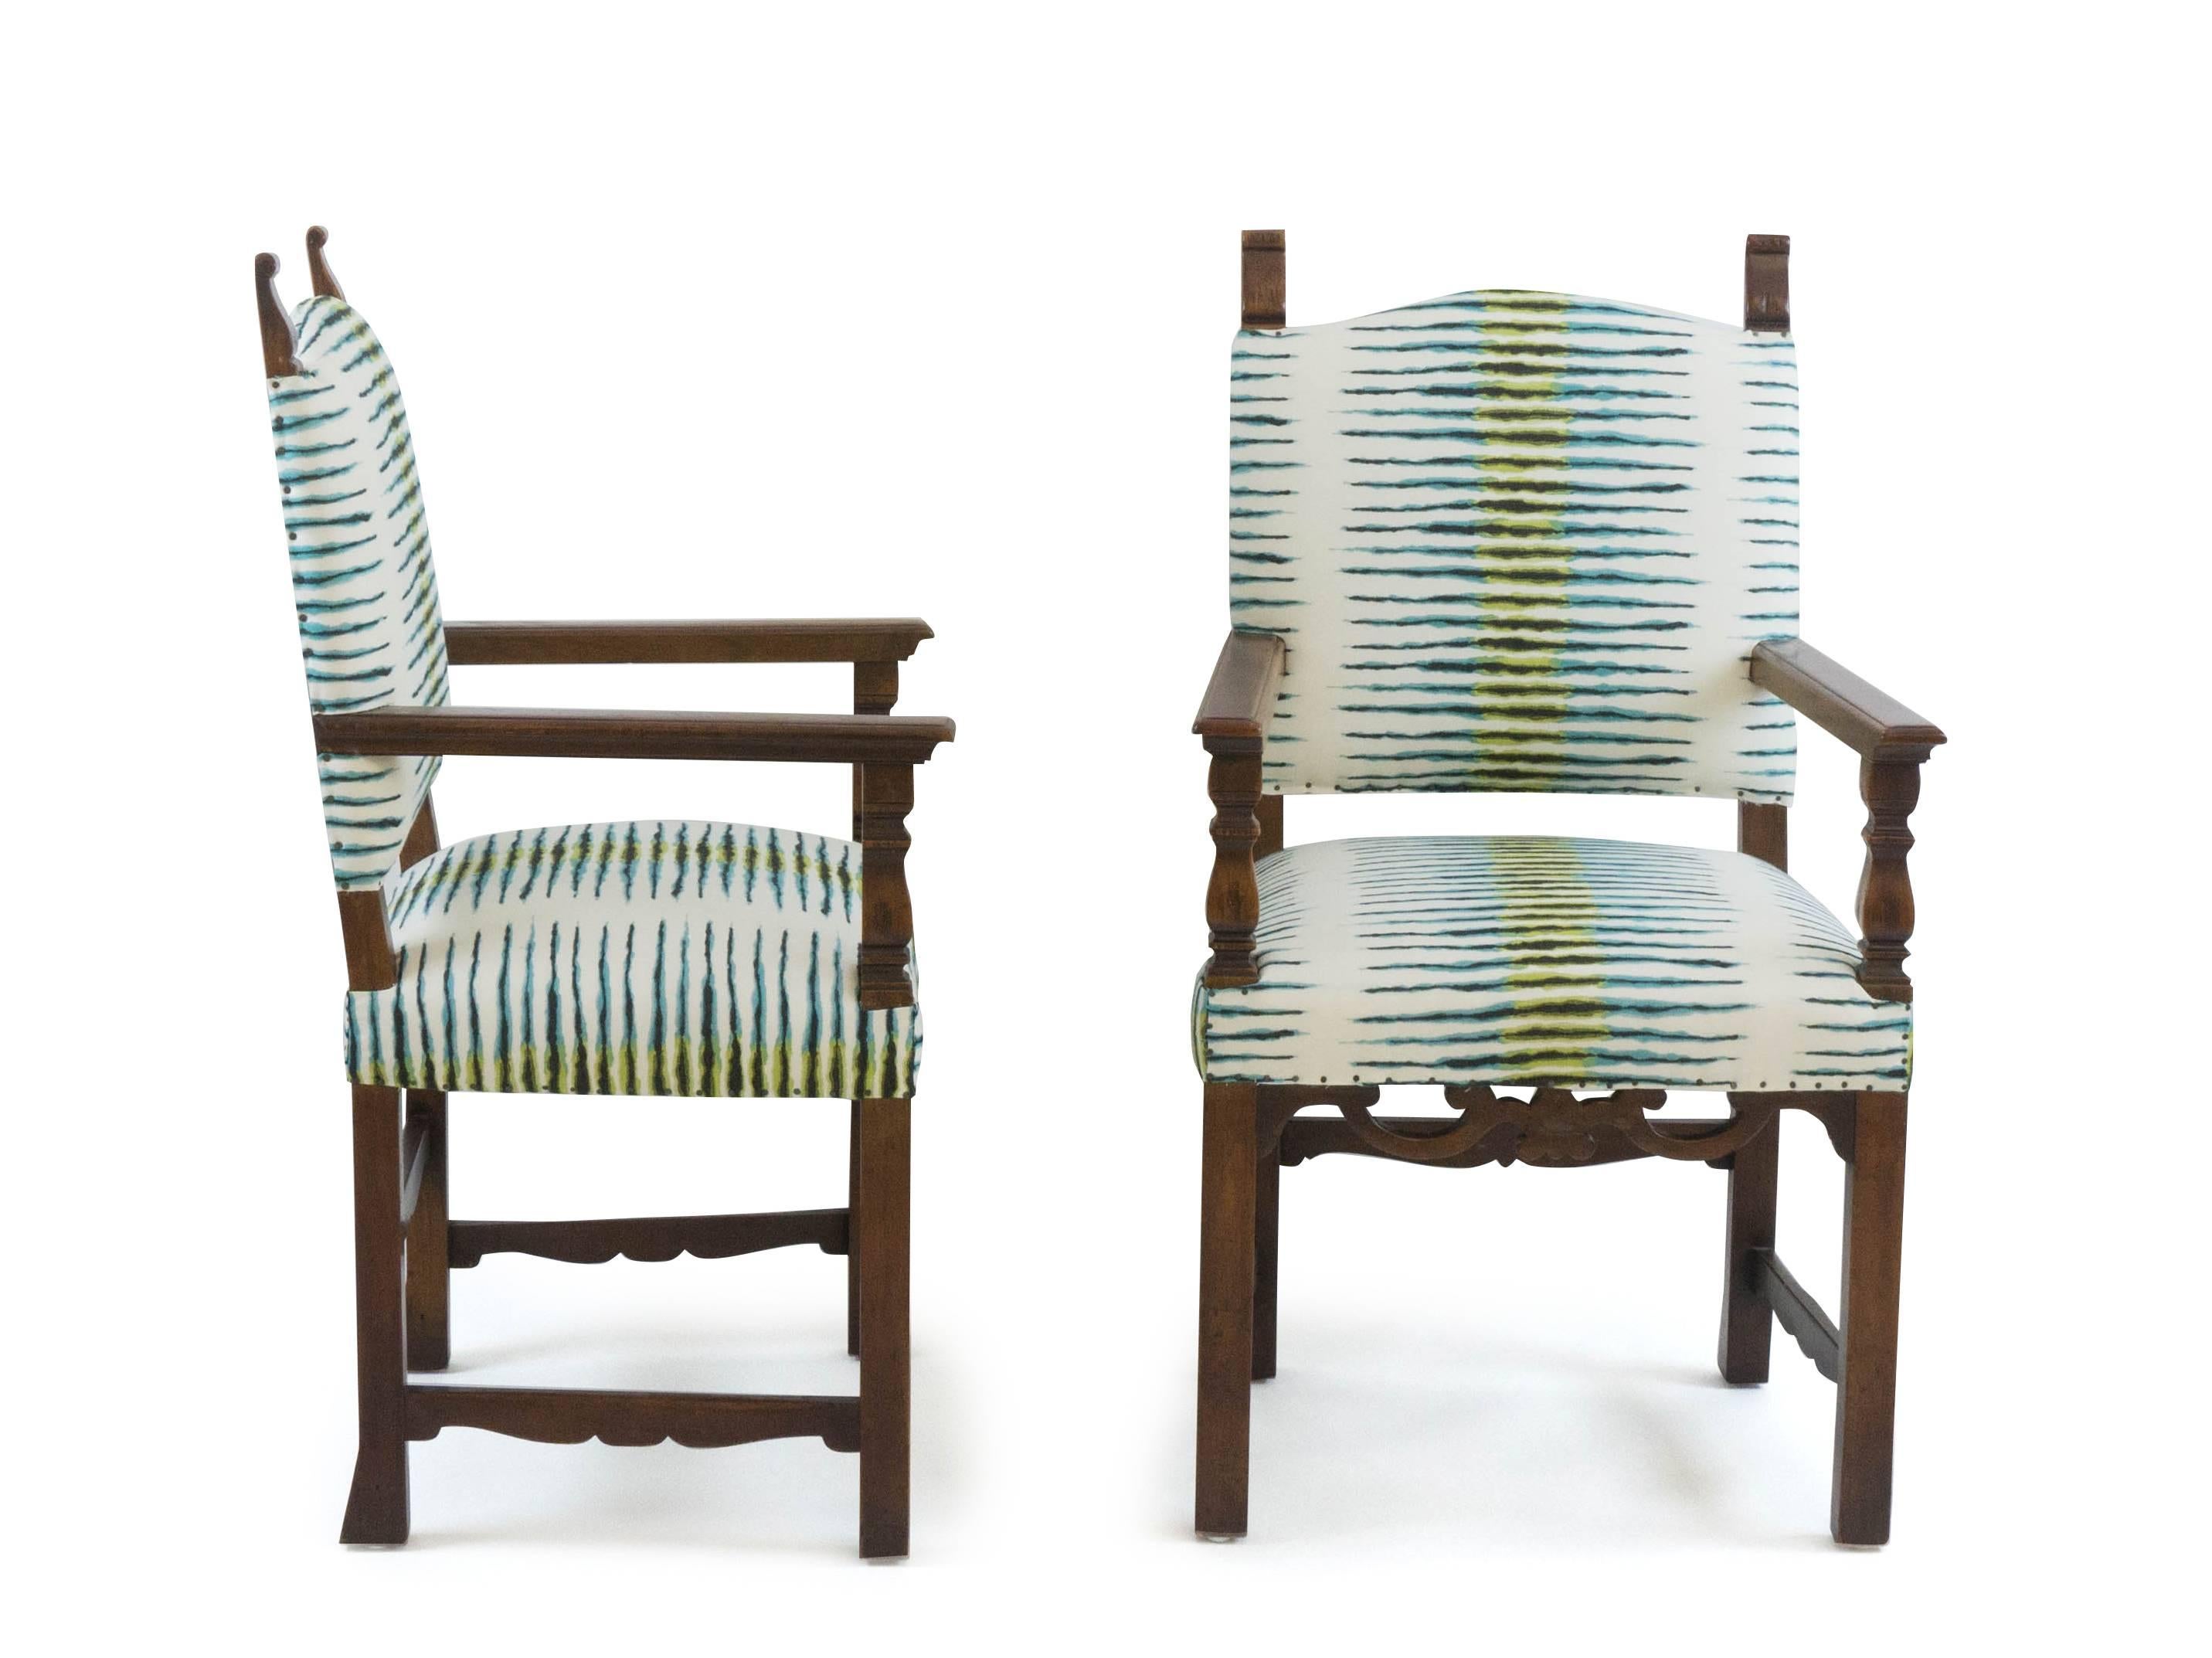 Pair turn of the century vintage Italian chairs newly tailored and finished with exposed small French-style nail heads.  Beautifully carved wood detailing.

